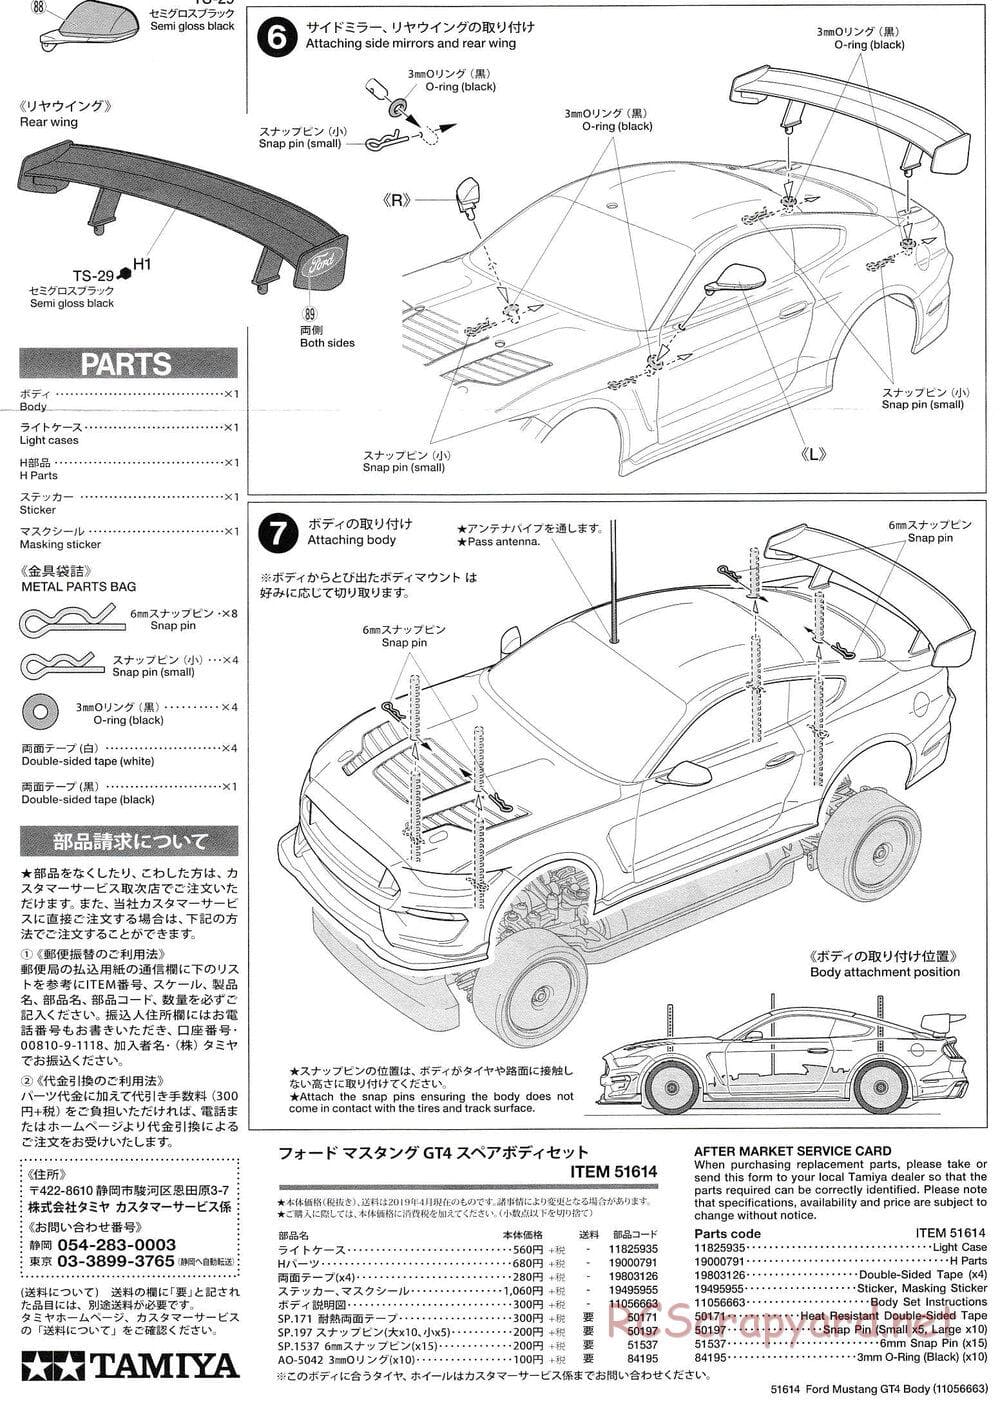 Tamiya - Ford Mustang GT4 - TT-02 Chassis - Body Manual - Page 6